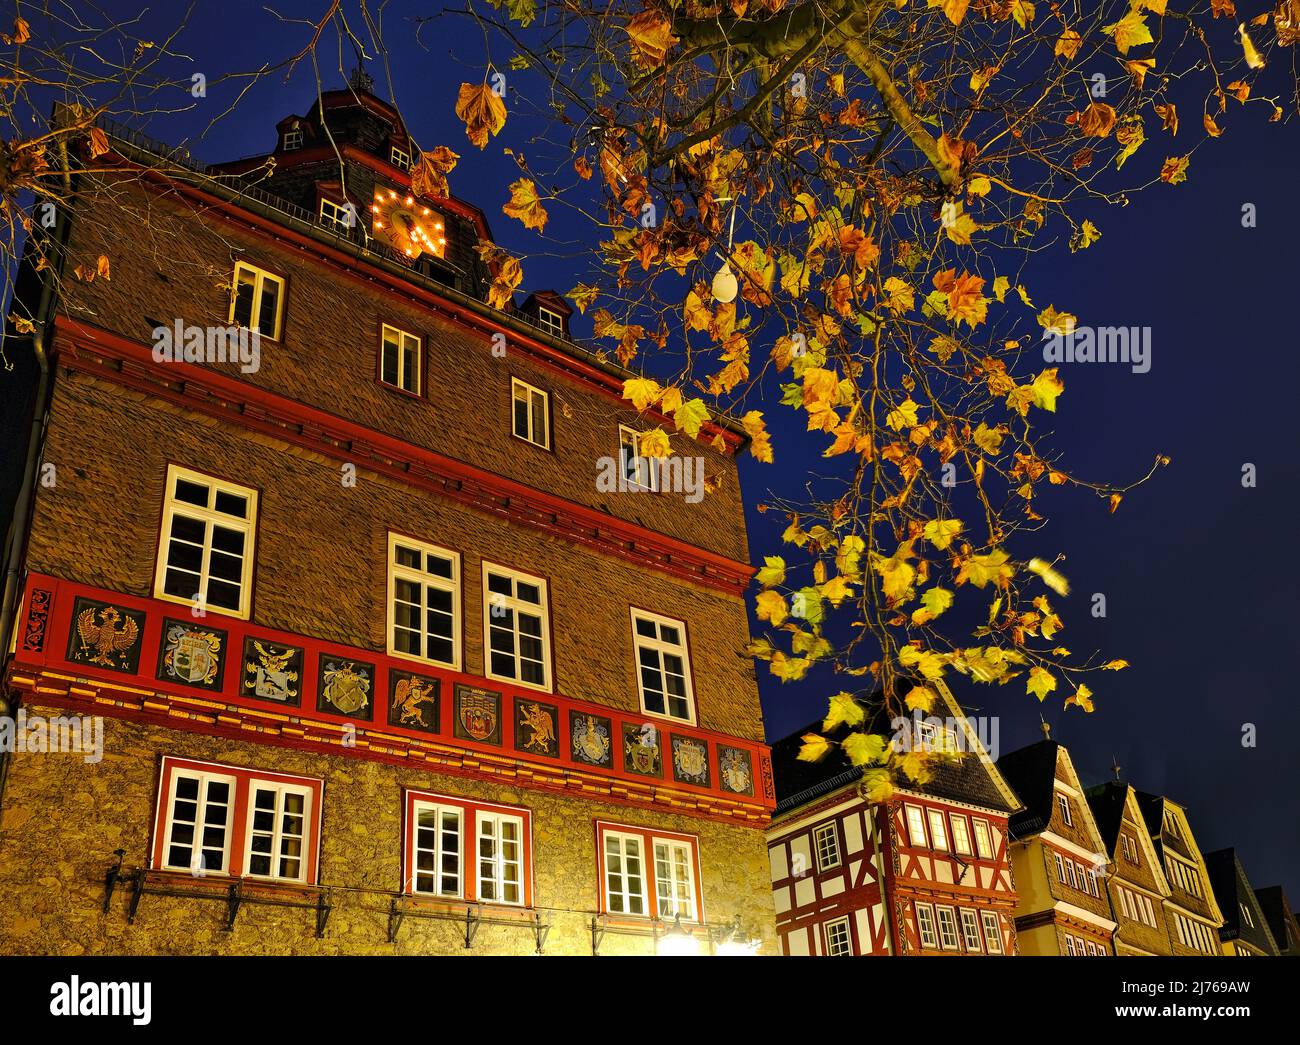 Europe, Germany, Hesse, city Herborn, historical old town, Christmas, Christmas lights, town hall Stock Photo